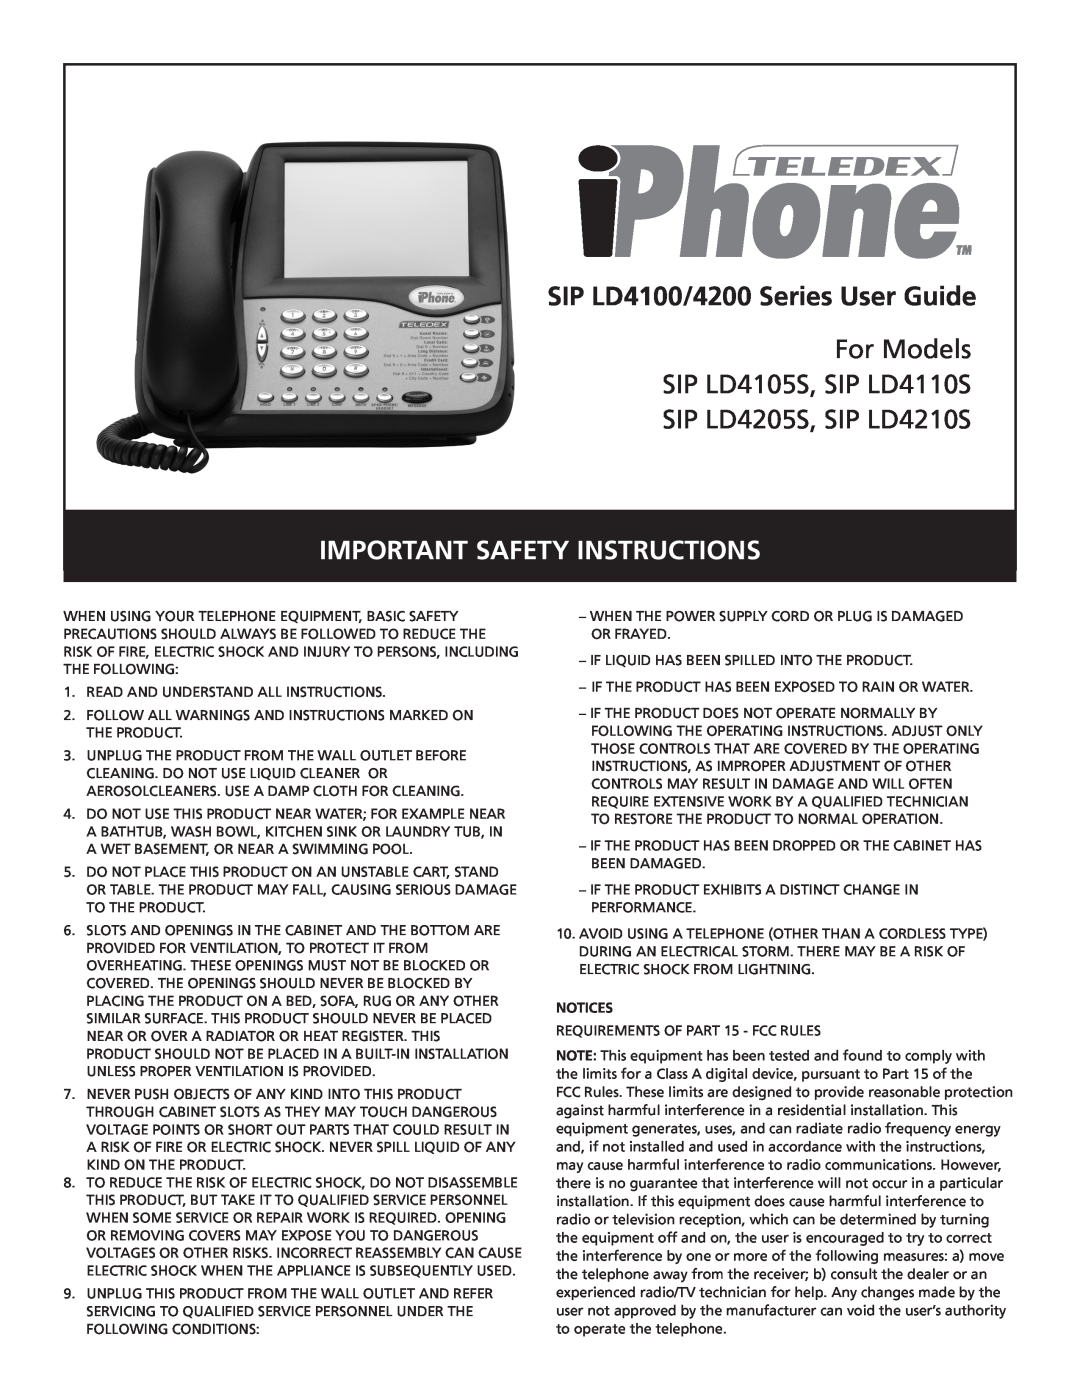 Teledex SIP LD4205S important safety instructions SIP LD4100/4200 Series User Guide, Important Safety Instructions 